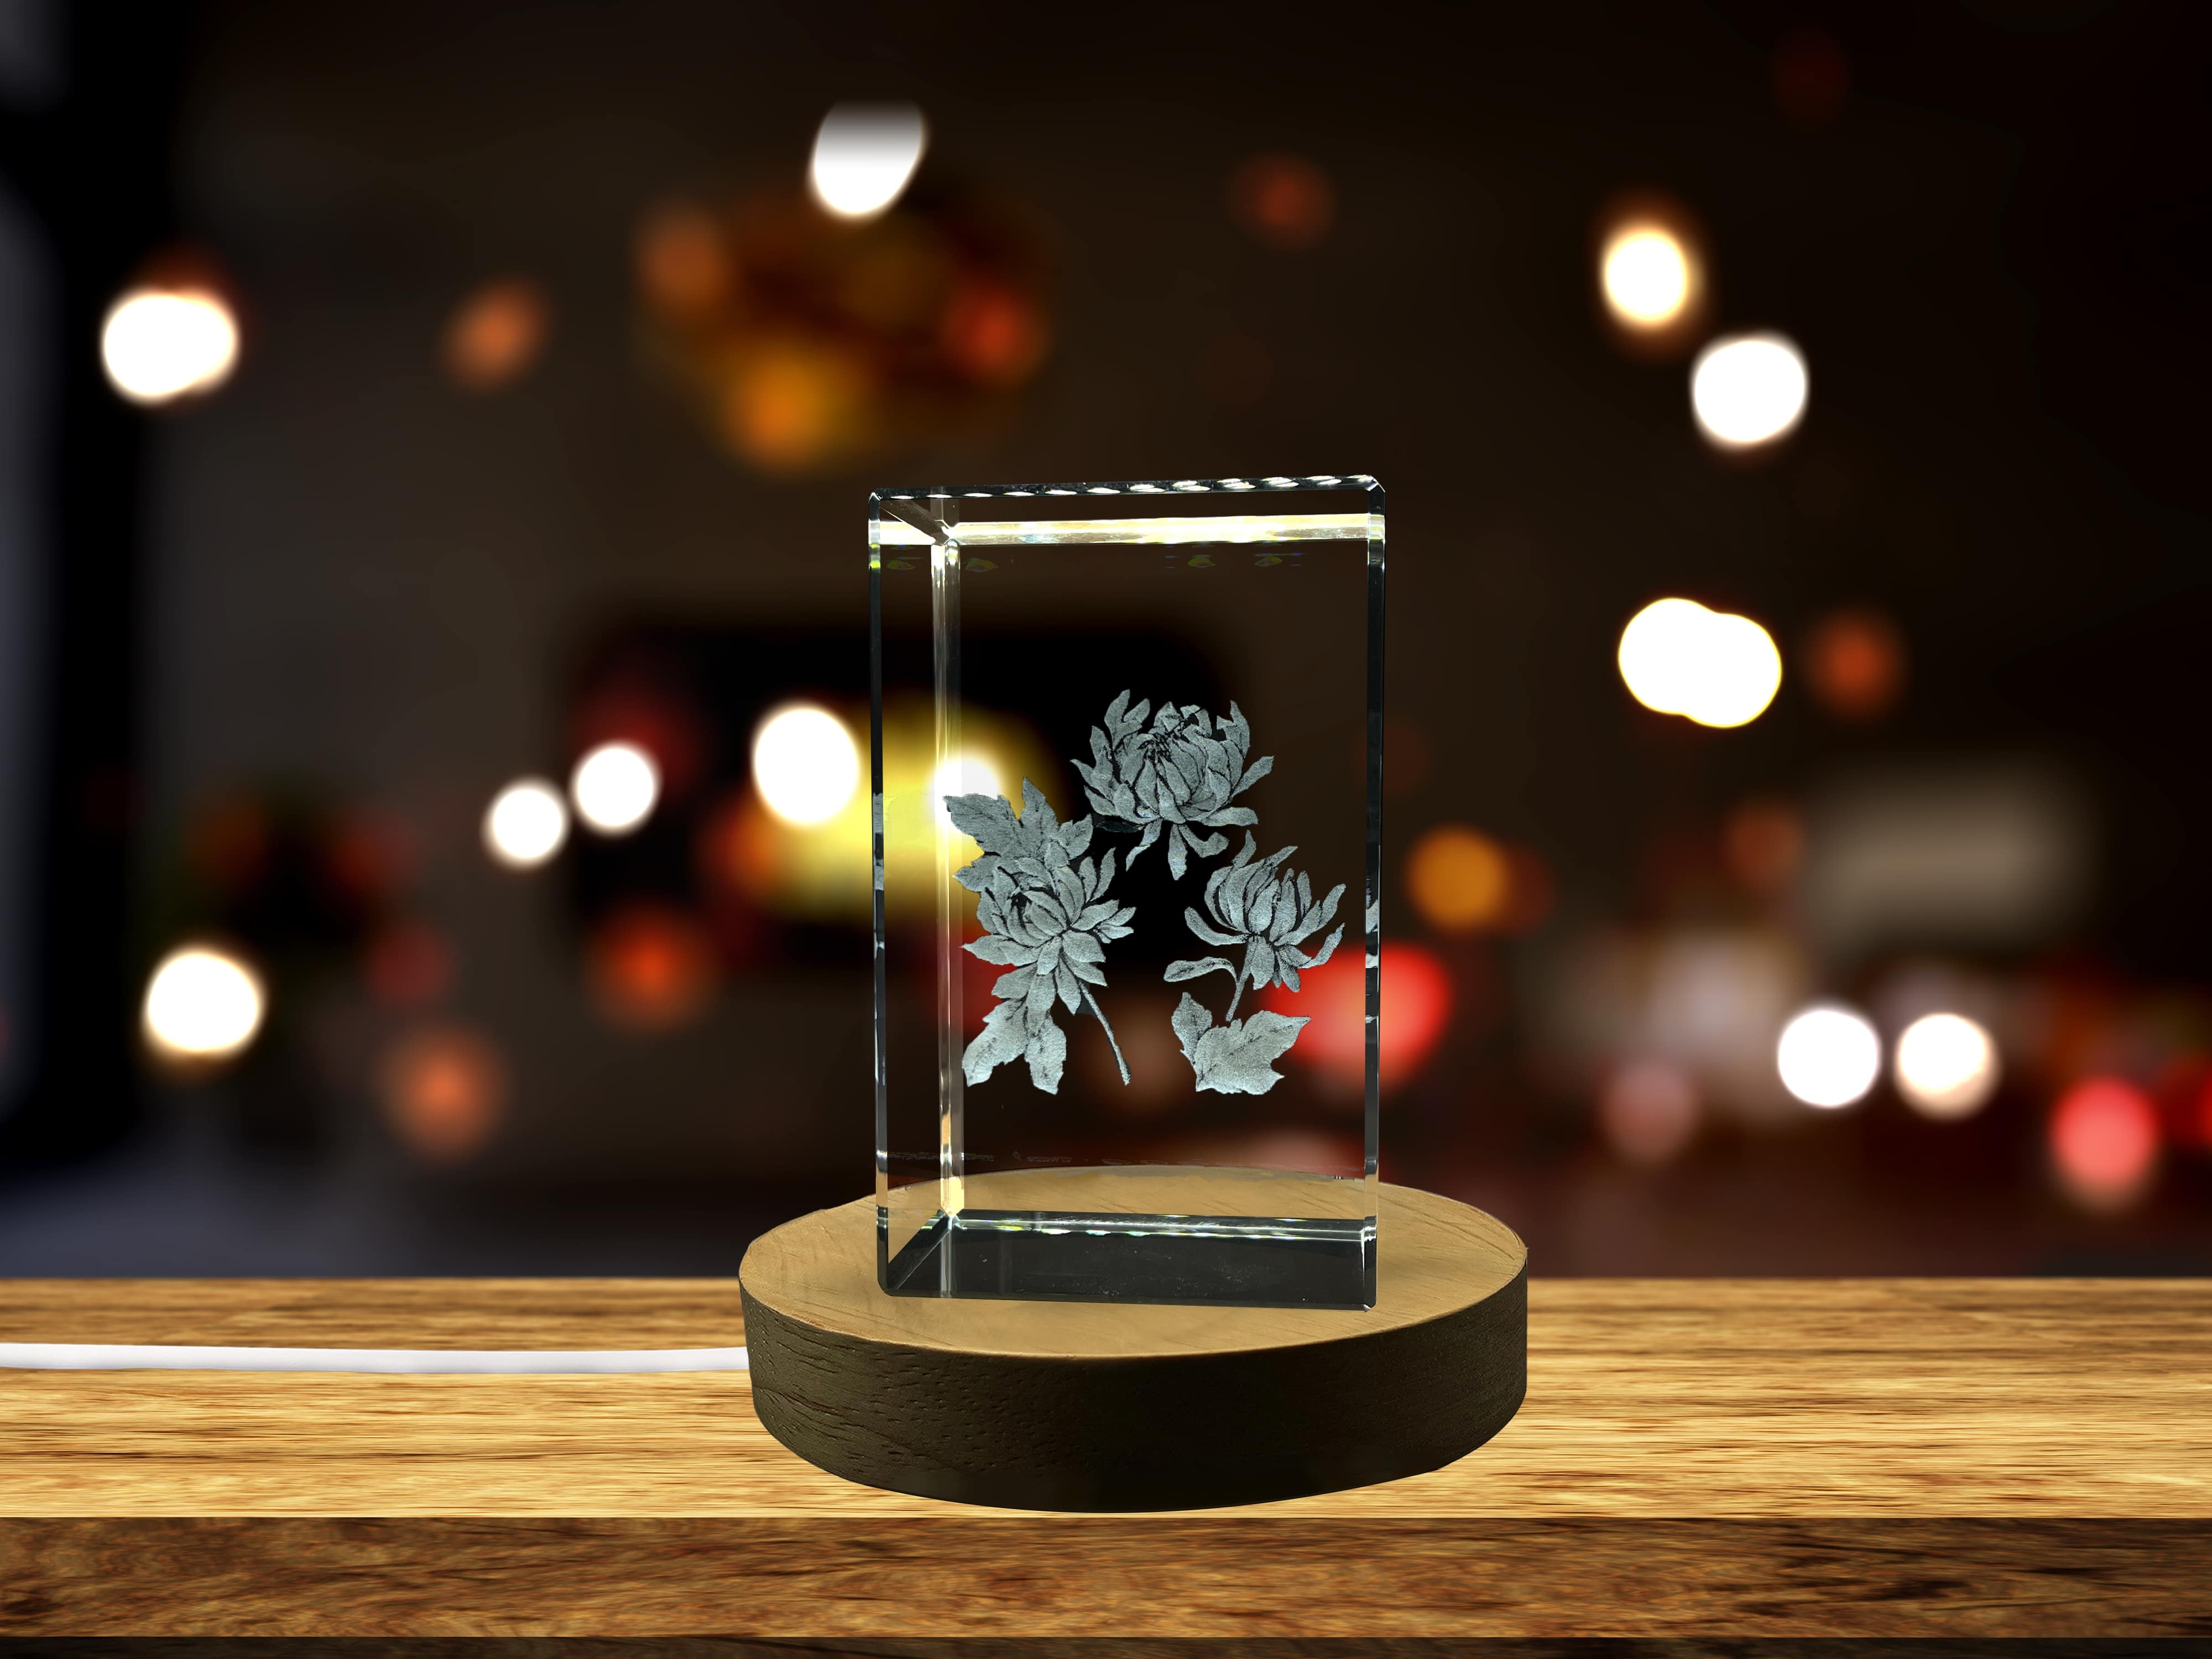 3D Engraved Crystal Chrysanthemum Art - Made in Canada | Unique Keepsake Gift A&B Crystal Collection